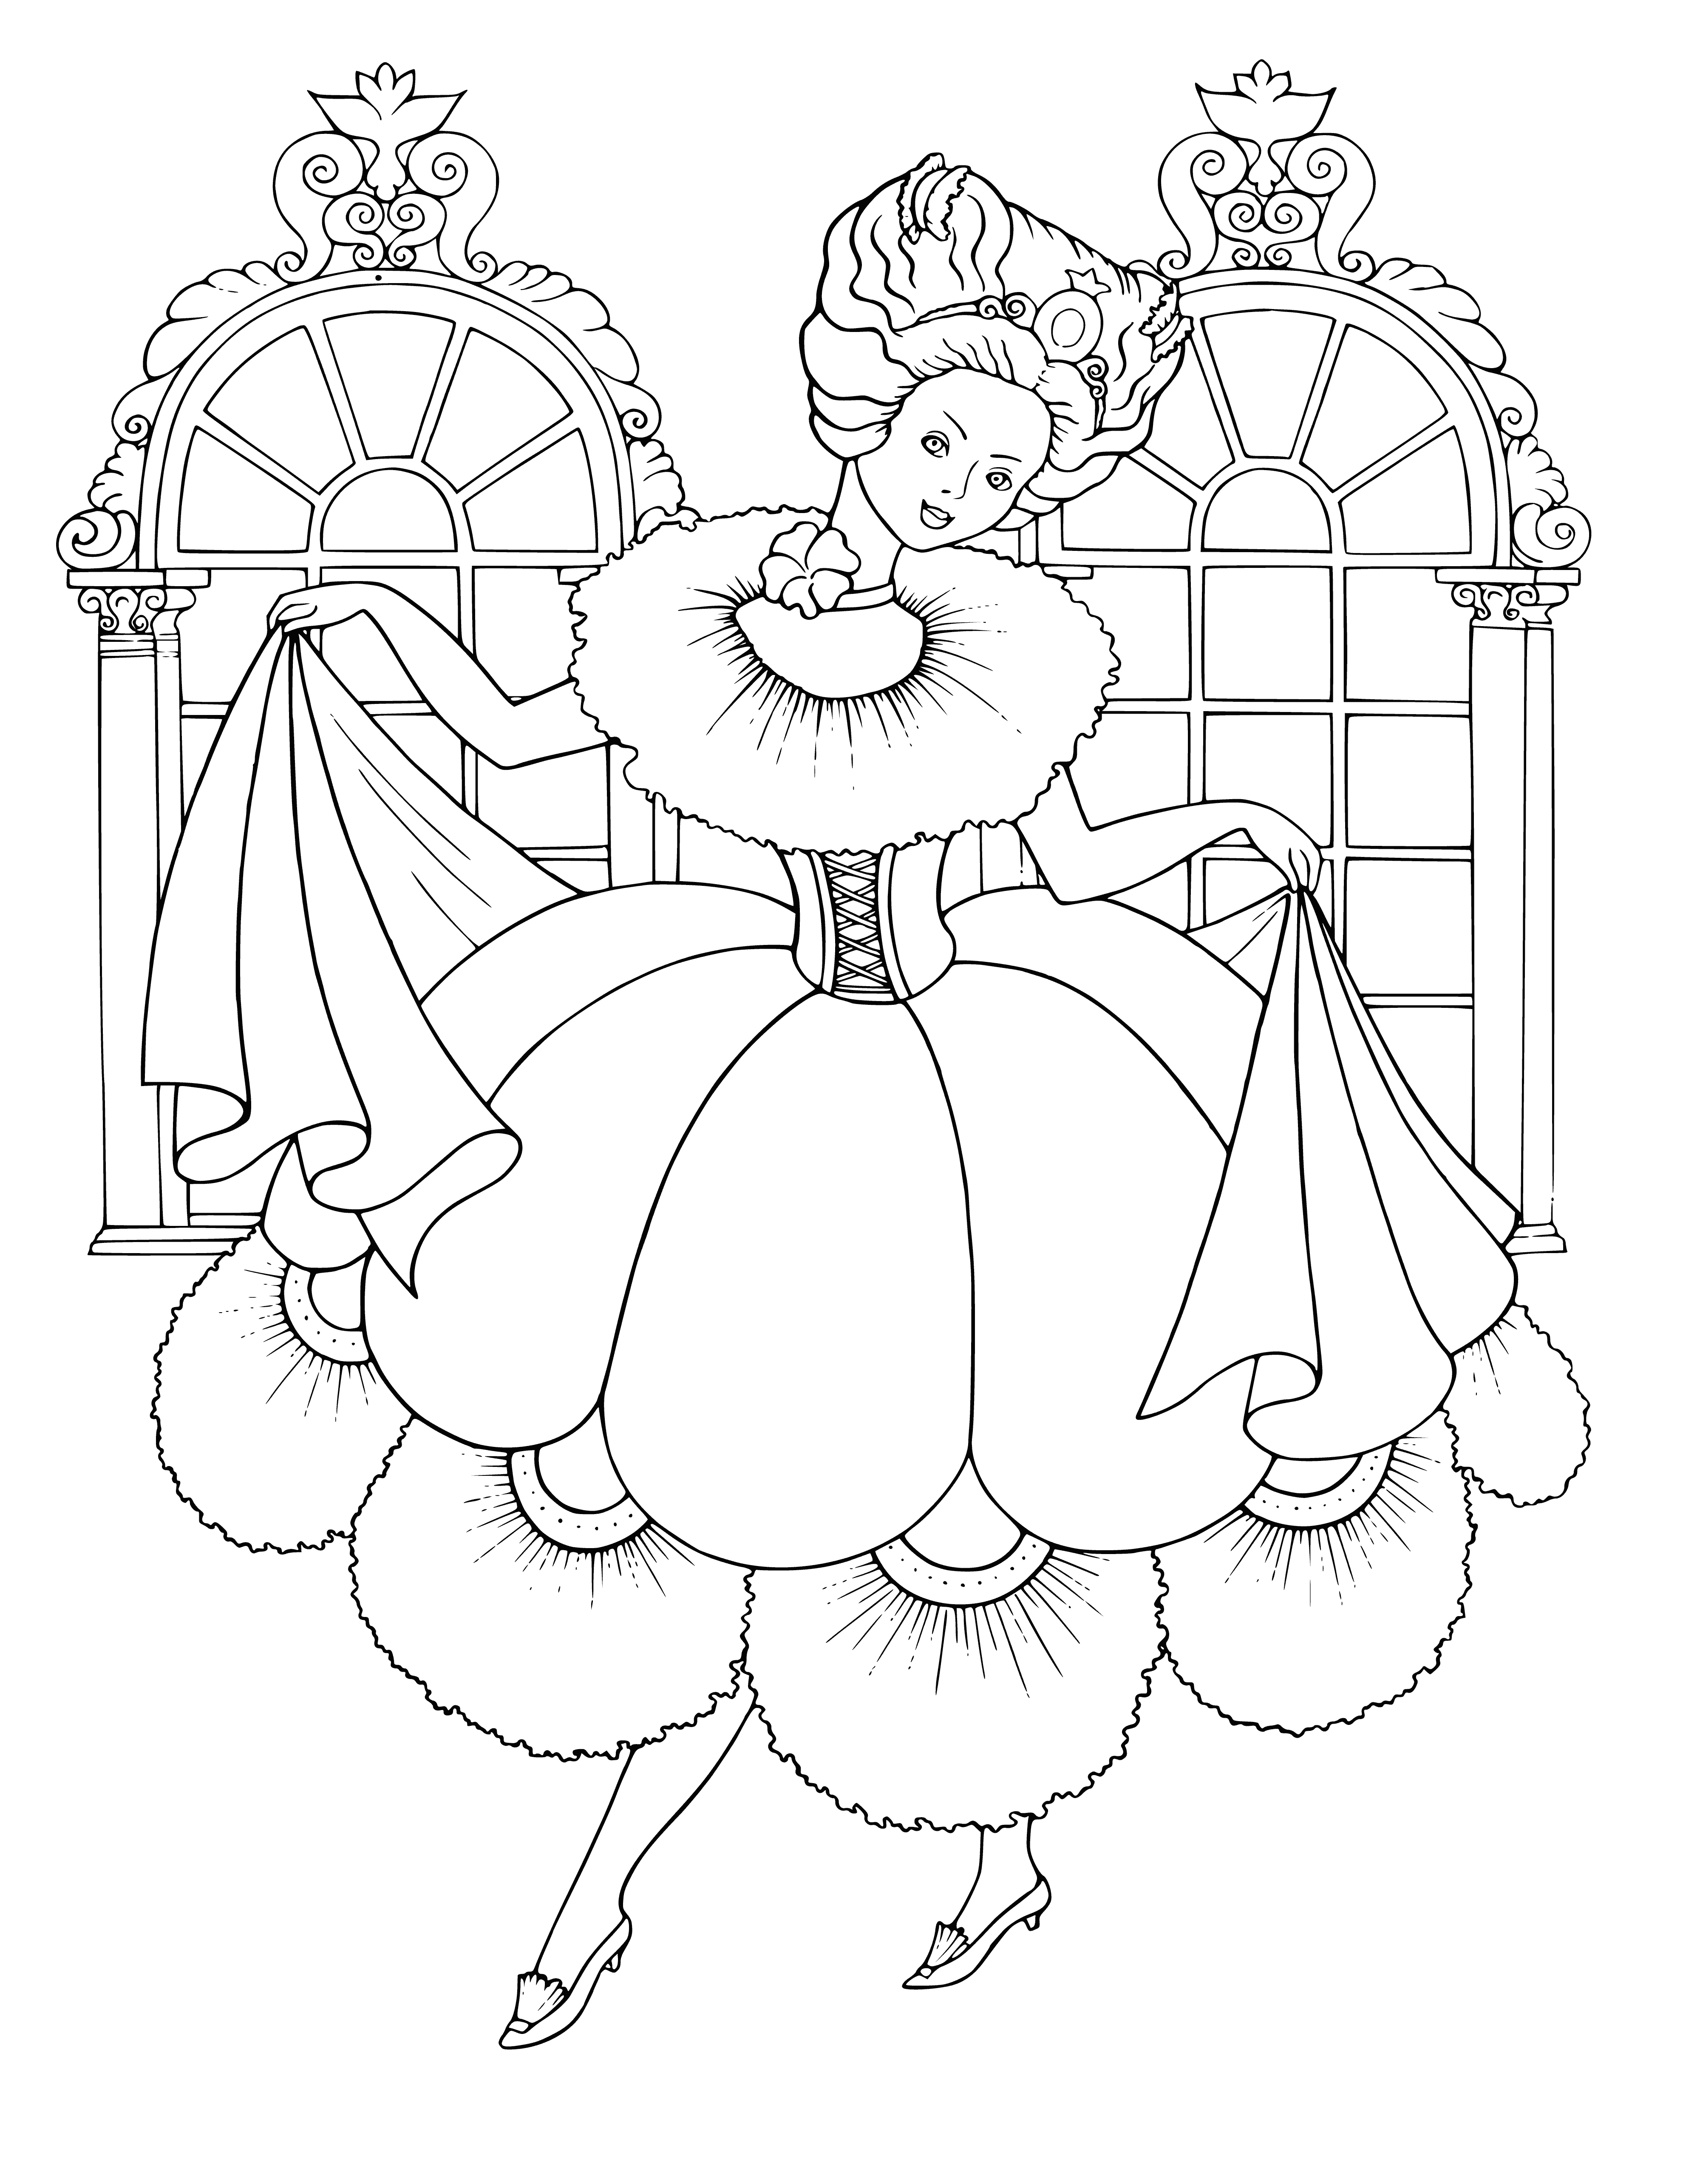 coloring page: Princess stands at ball, surrounded by people, in beautiful dress and crown; She is happy and confident. #happilyeverafter